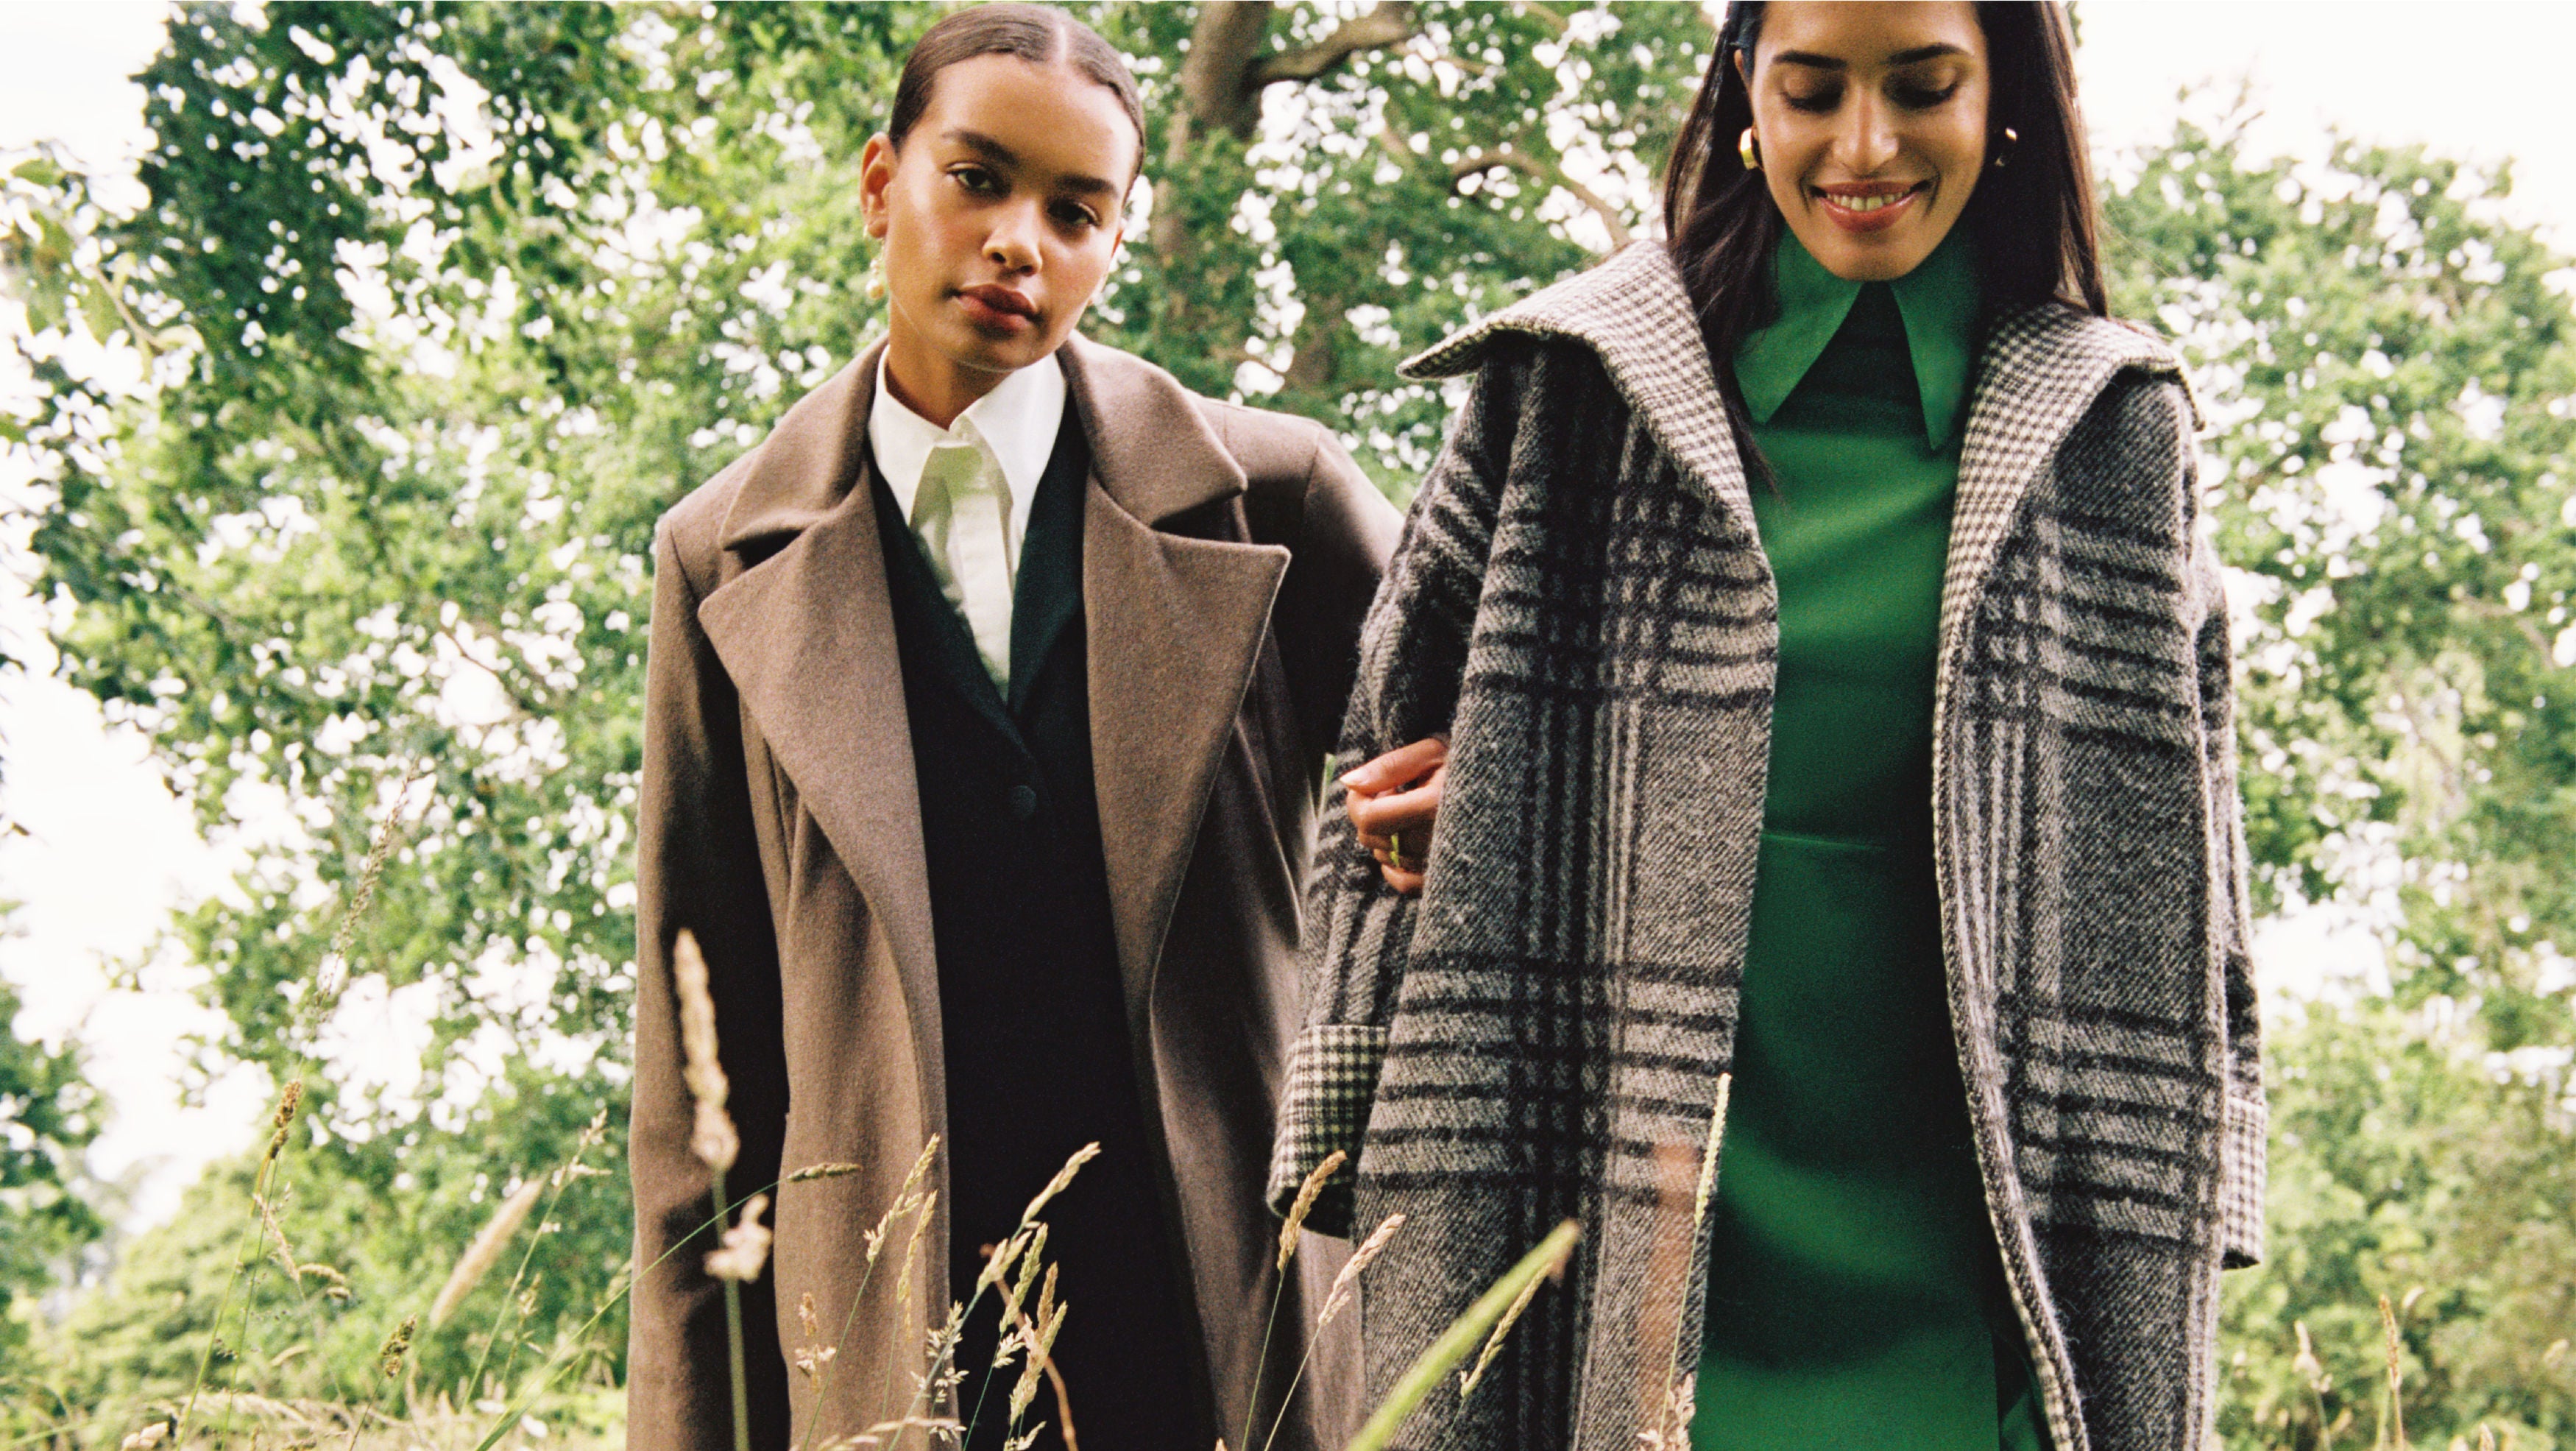 Photo issued by Yoox Net-A-Porter of a cashmere coat (left) and a check coat being modelled at Highgrove House